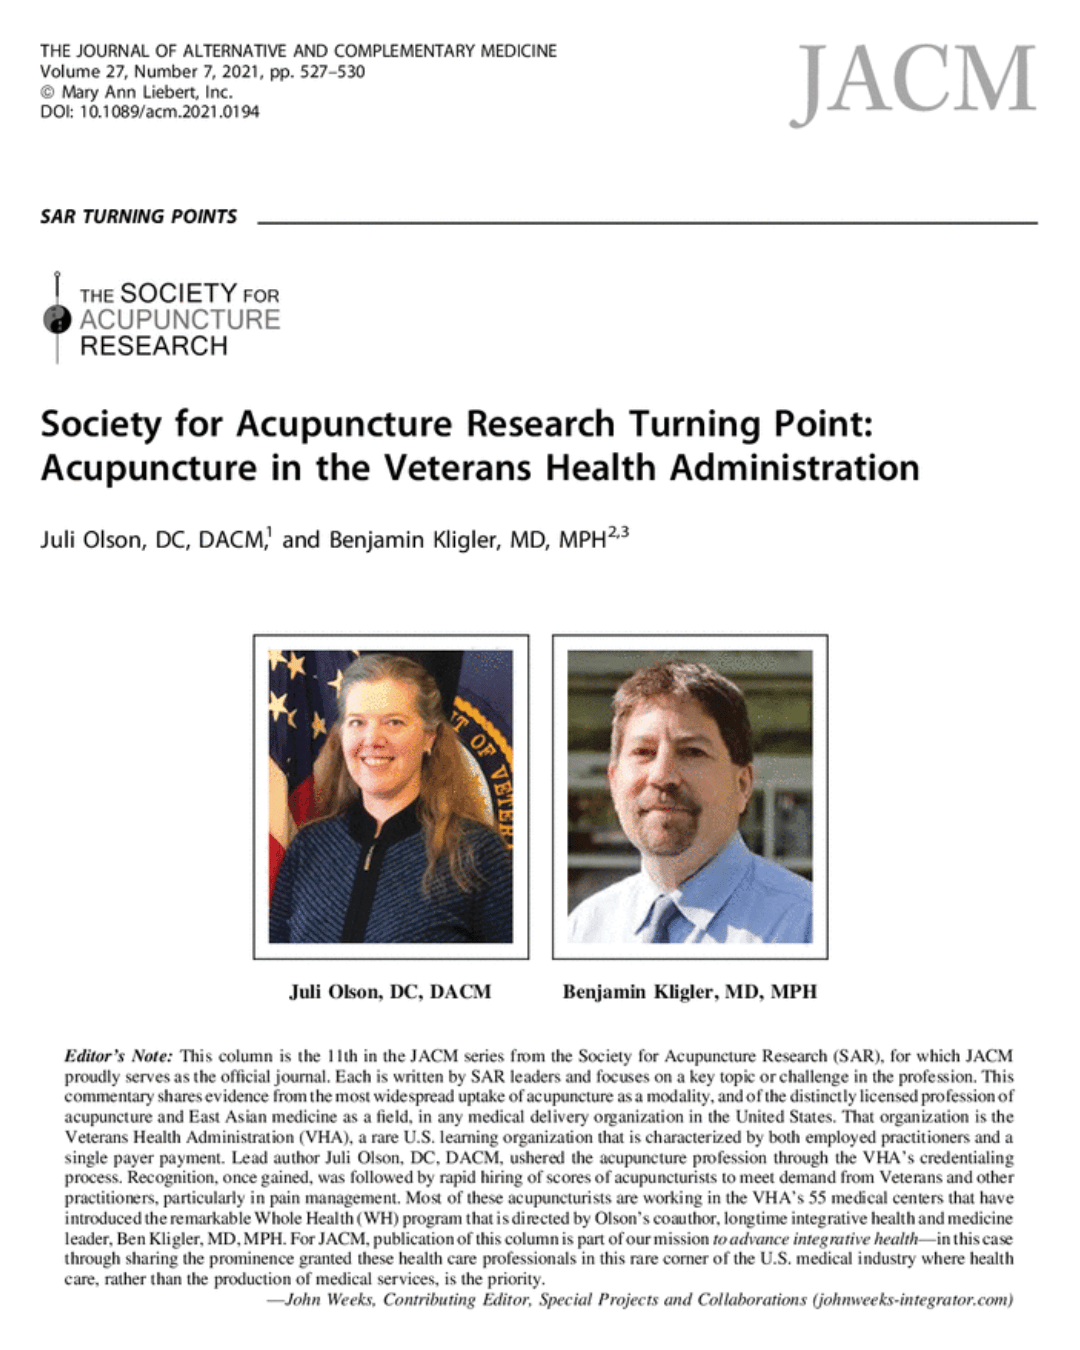 SAR Turning Point: Acupuncture in the Veterans Health Administration